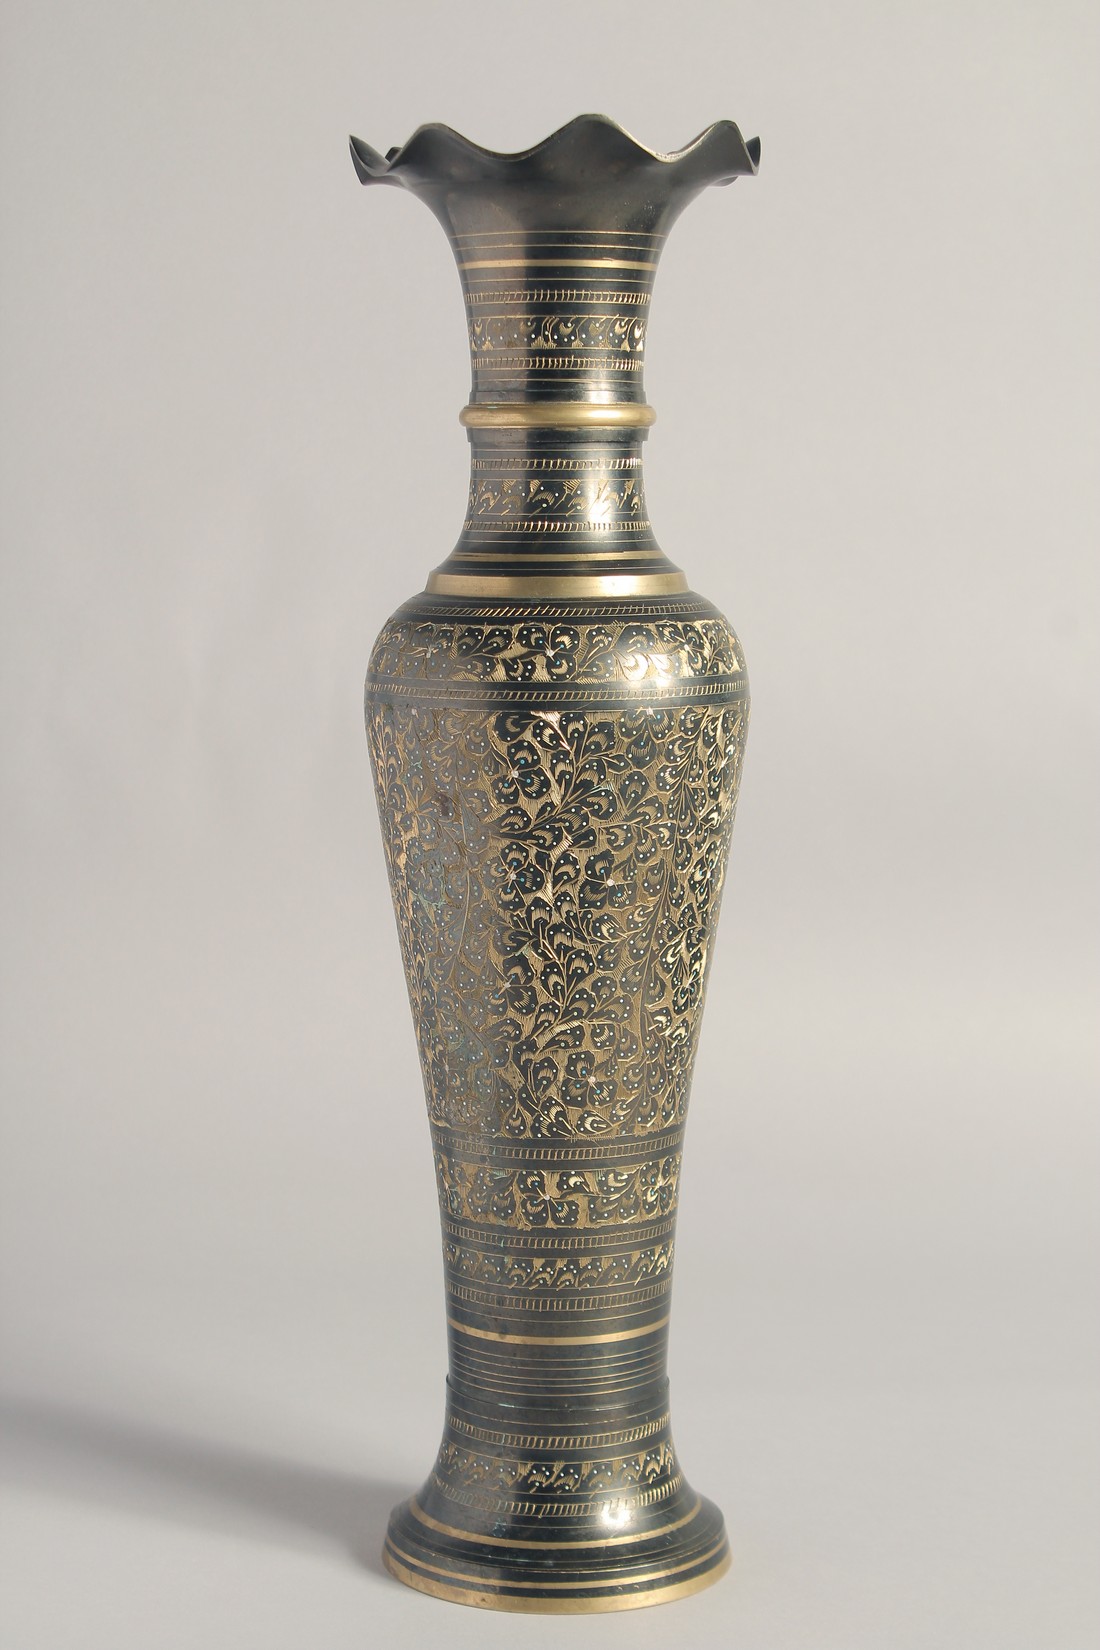 A FINE INDIAN METAL VASE, with engraved decoration, 40.5cm high. - Image 2 of 8